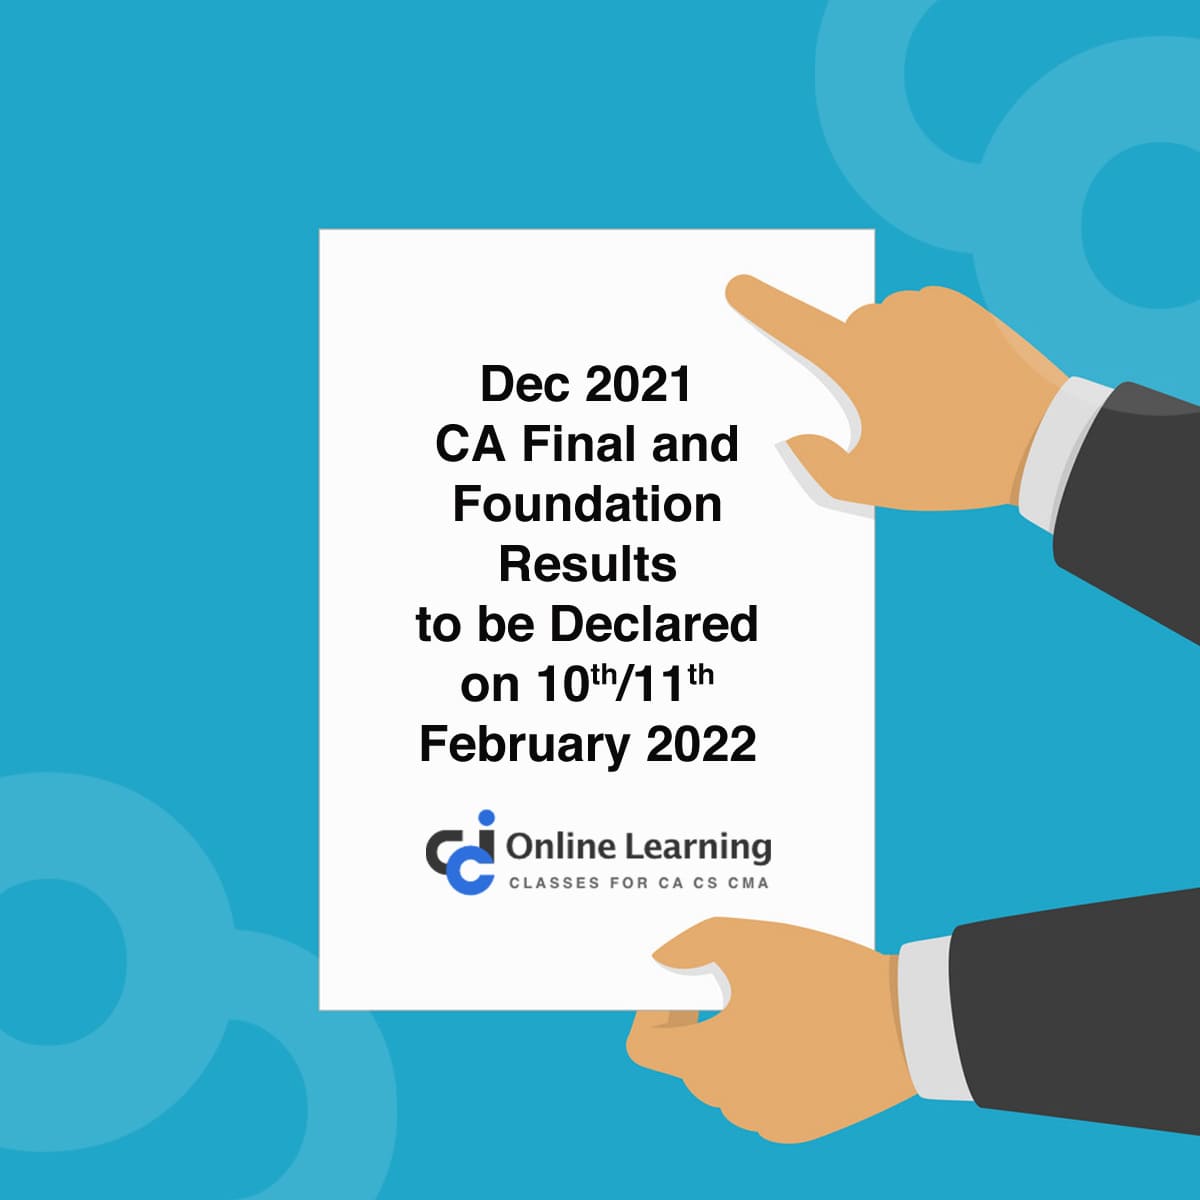 Dec 2021 CA Final and Foundation Results likely to be declared on 10th/11th February 2022